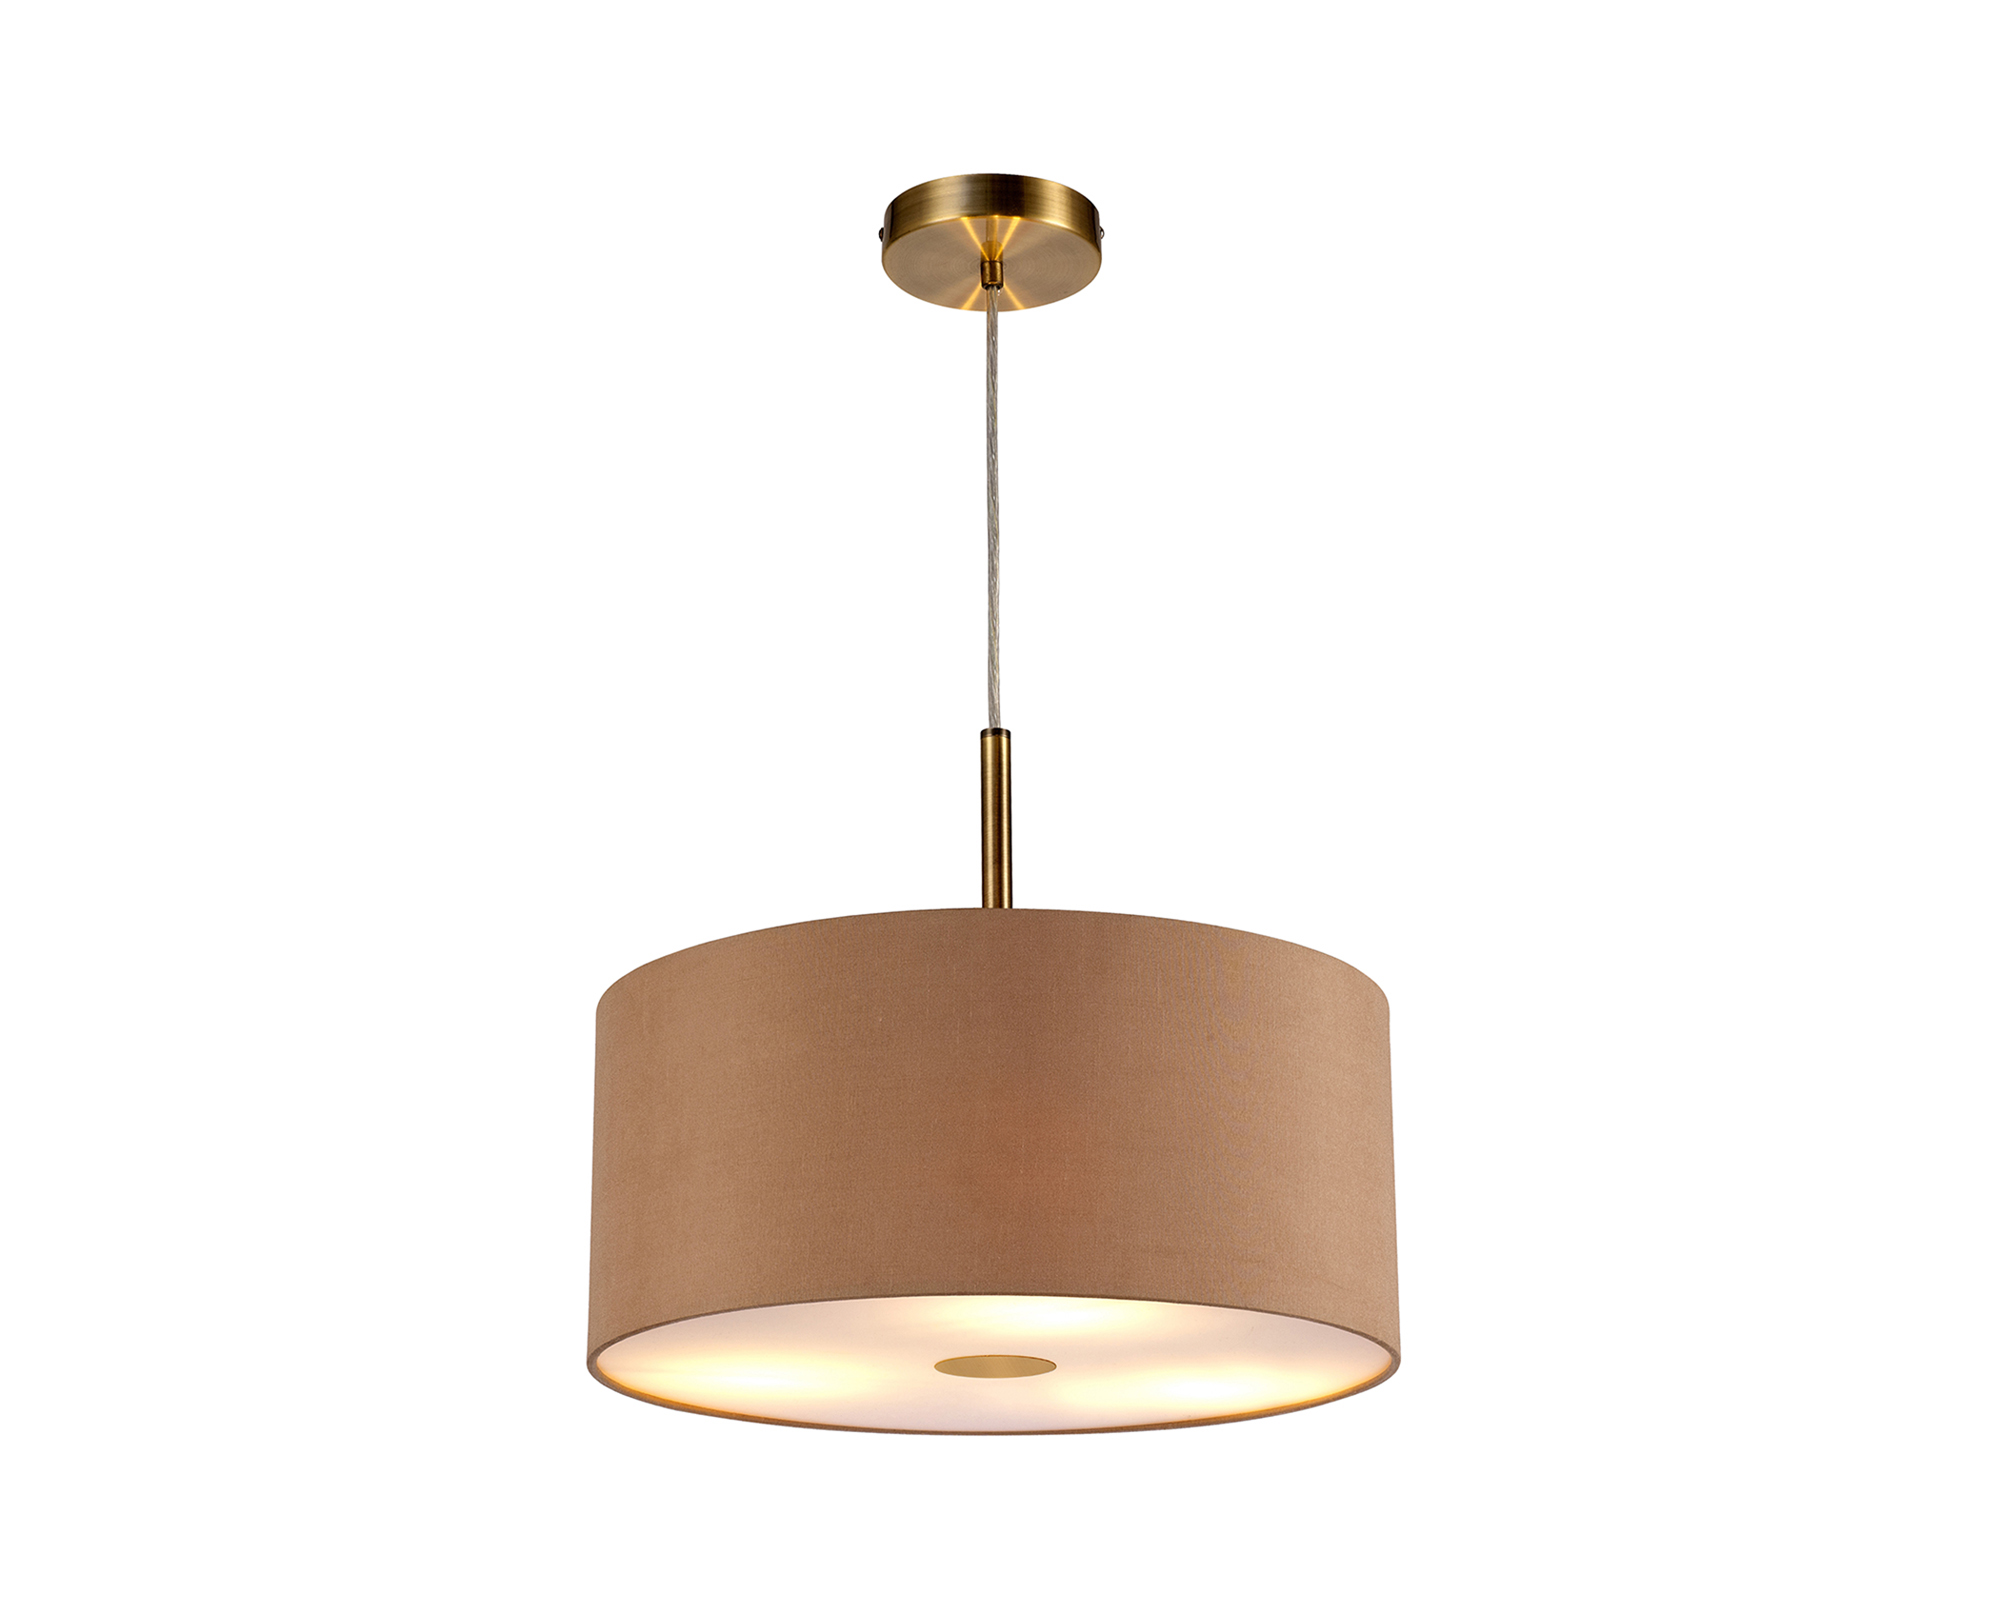 DK0400  Baymont 40cm 3 Light Pendant Antique Brass, Antique Gold/Ruby, Frosted Diffuser